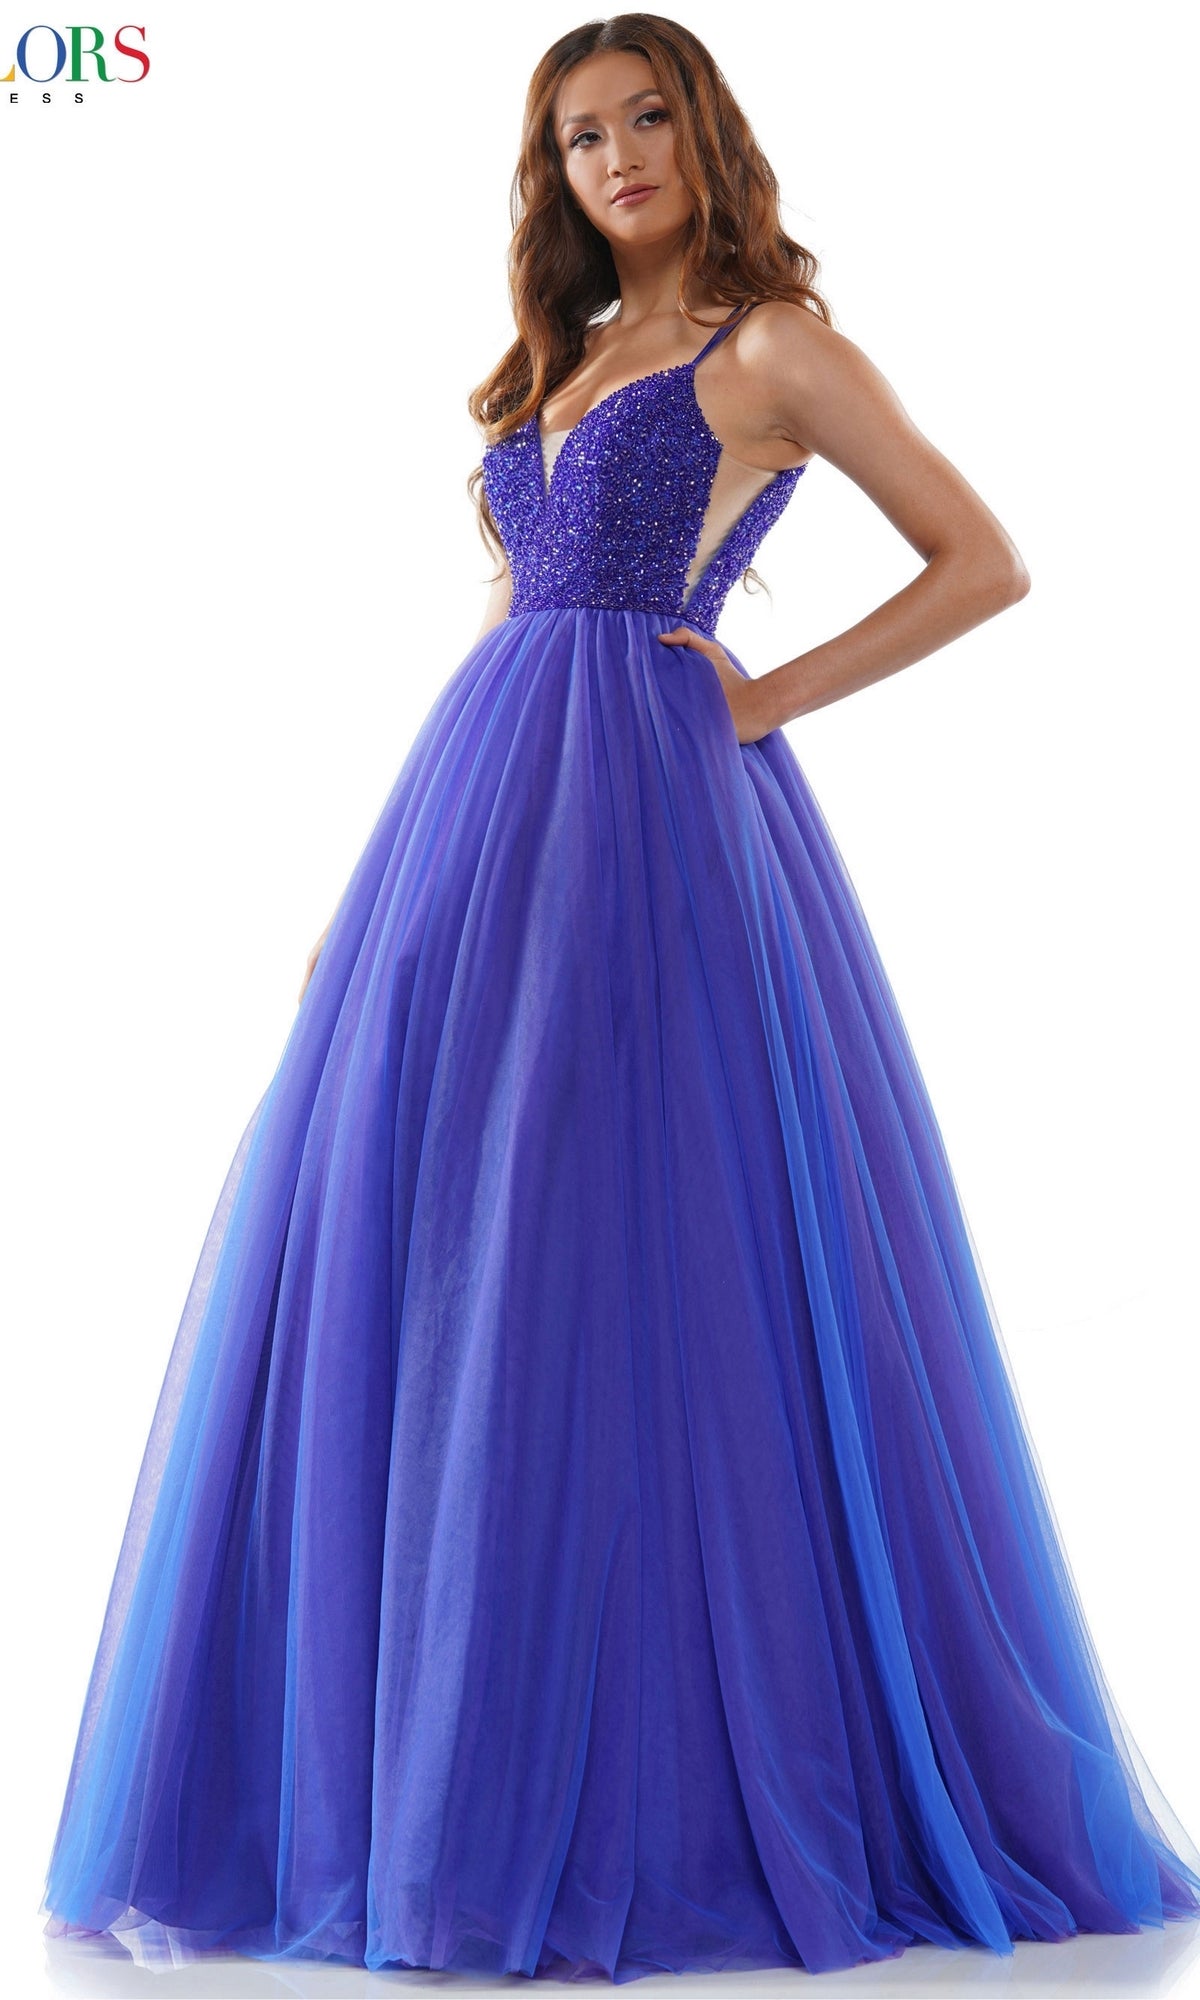 Beaded-Bodice Long Poofy Prom Ball Gown 2382